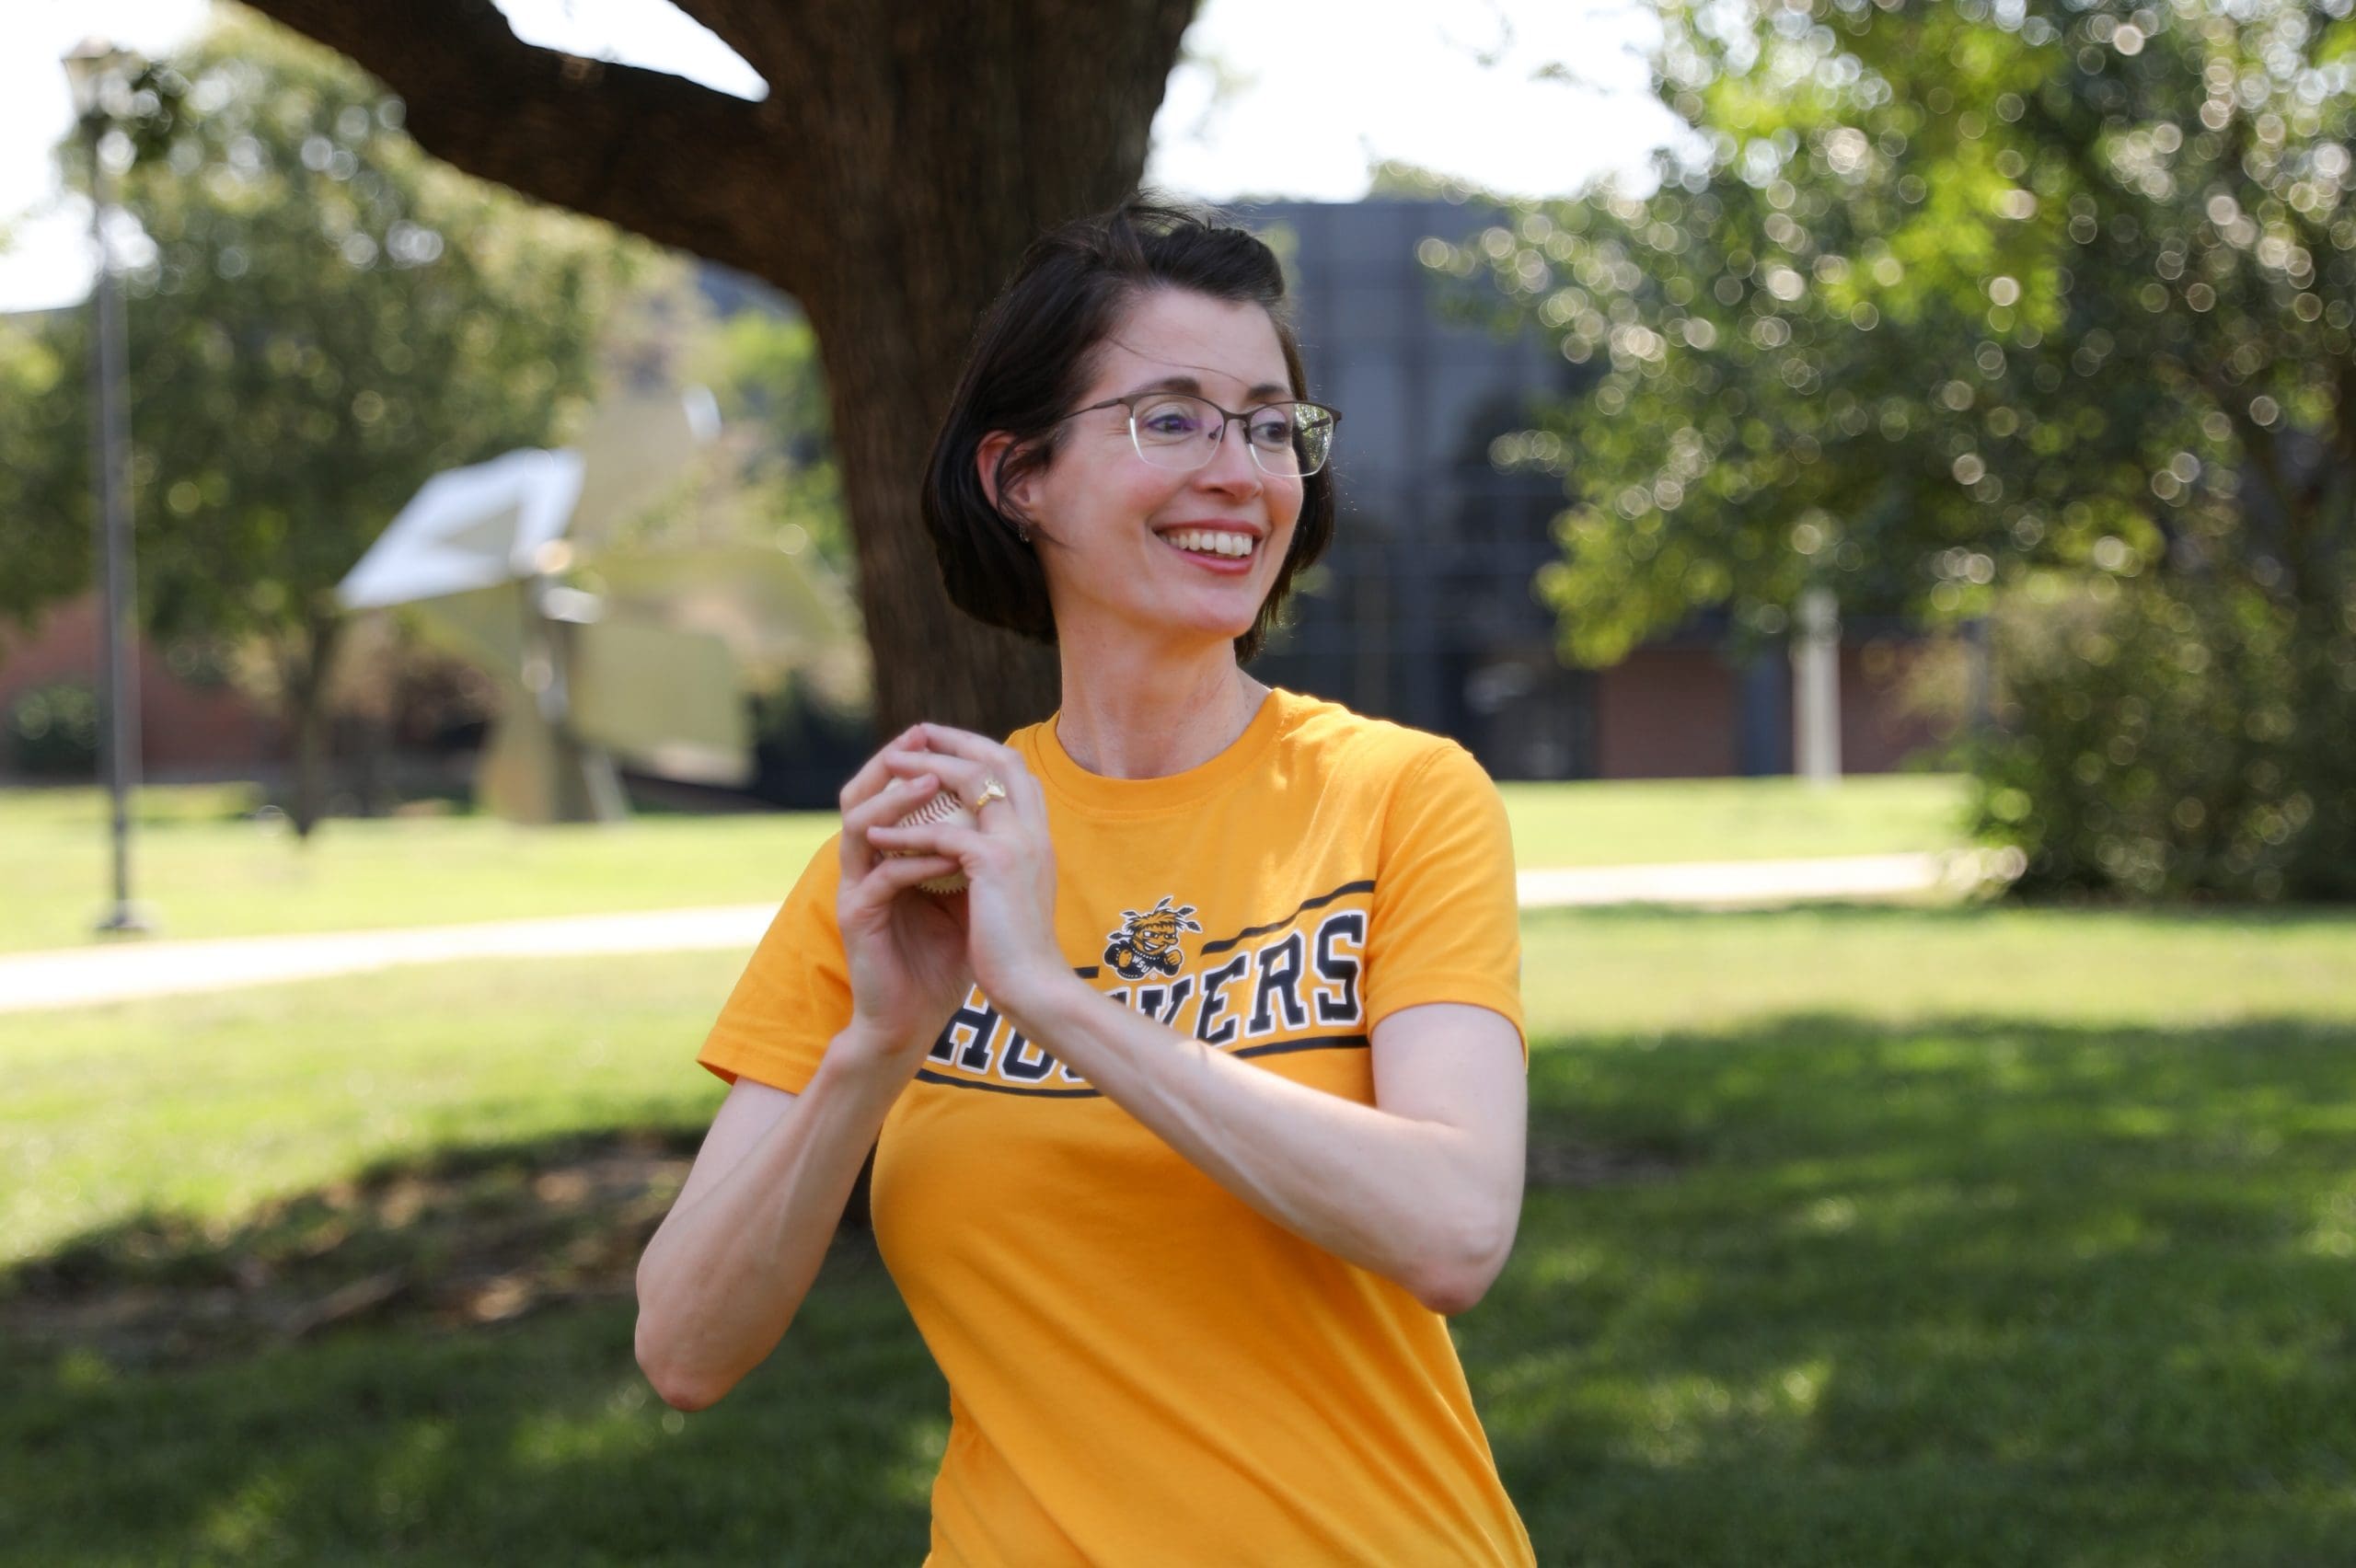 Dr. Jennifer Friend smiling with baseball practicing pitching on campus